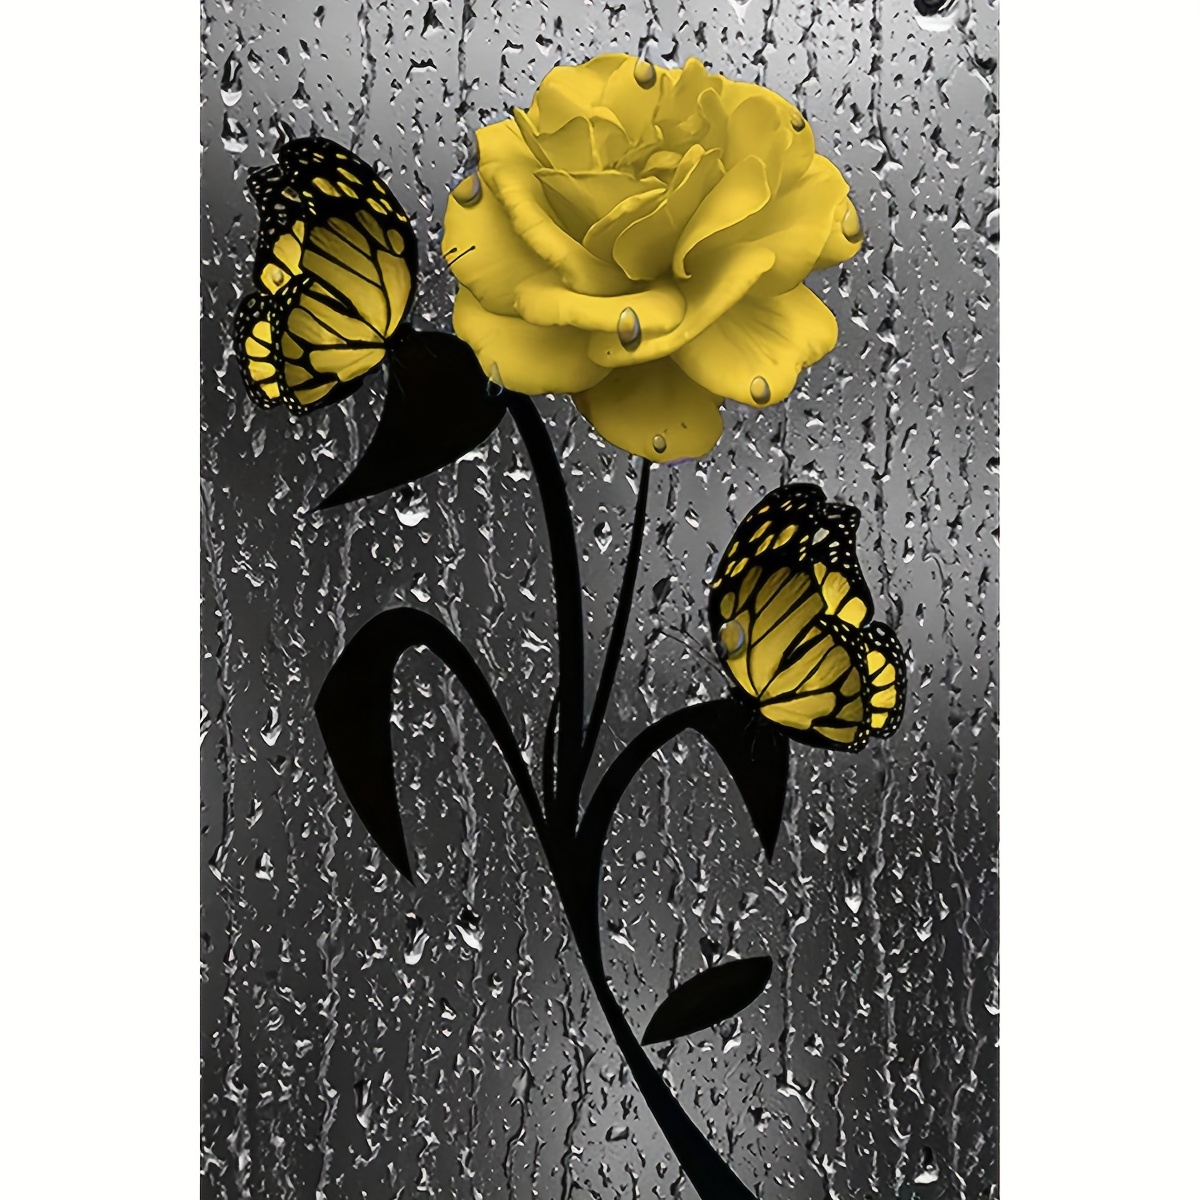 

1pc Yellow Rose Butterfly Canvas Wall Art, Premium Art Micro Spray Canvas Print Black And White Picture Painting Wall Decoration Living Room Bedroom Bathroom Kitchen Office 12x18 Inch Frameless